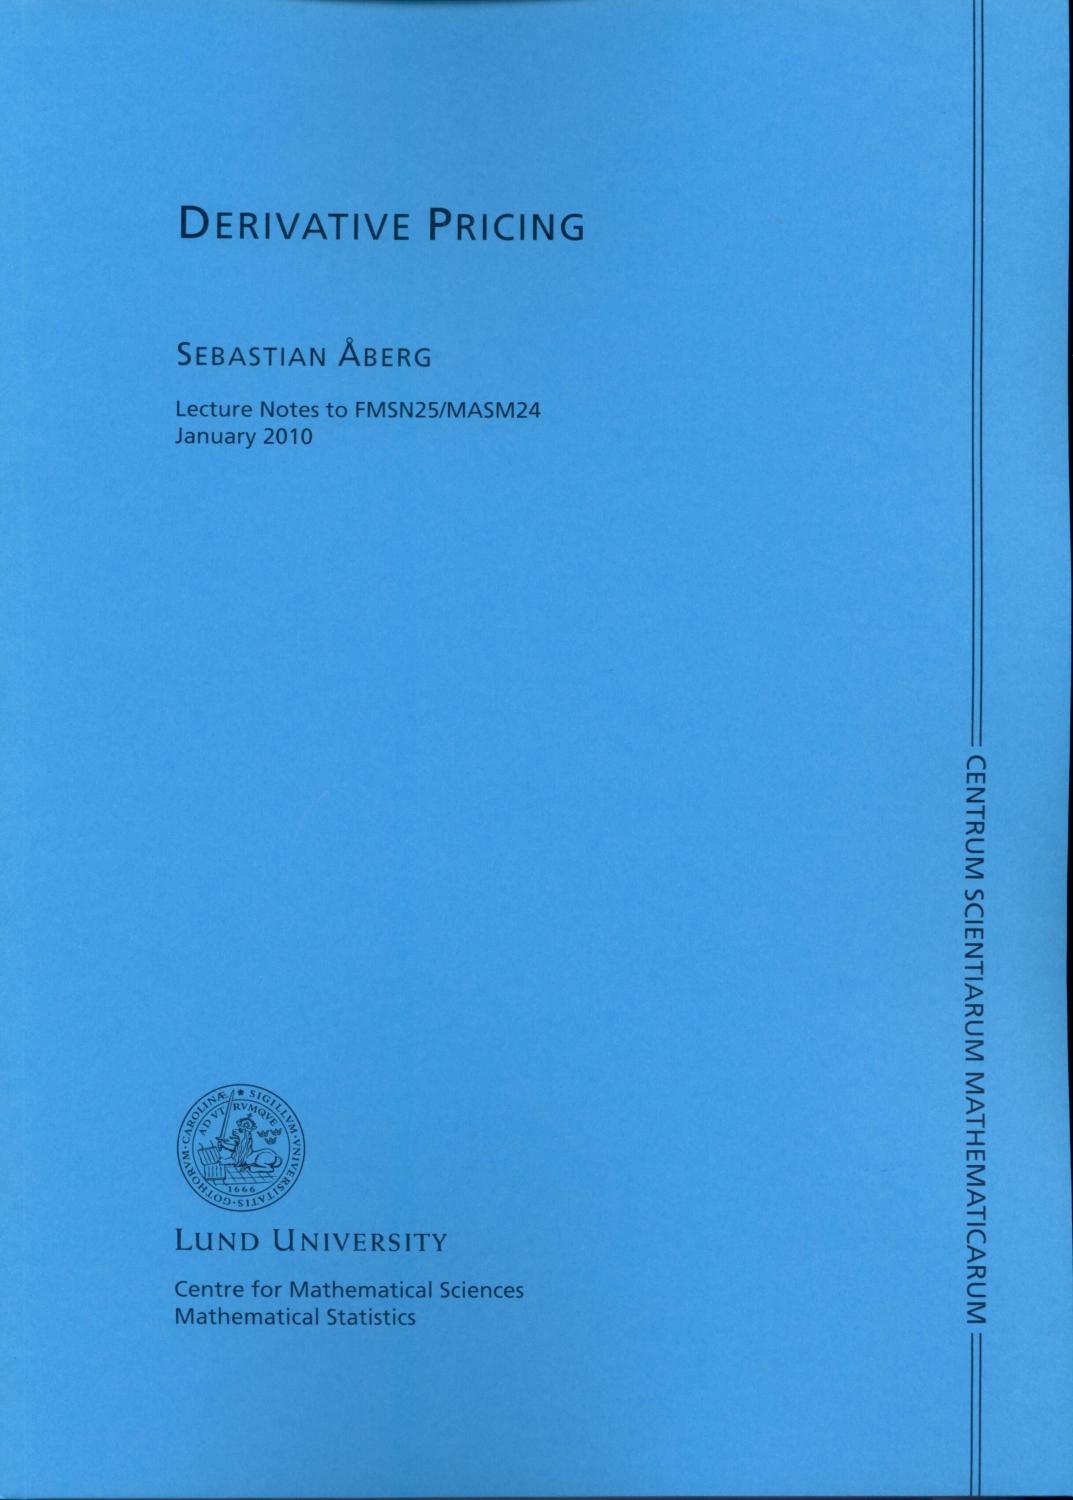 Derivative Pricing, Lecture Notes